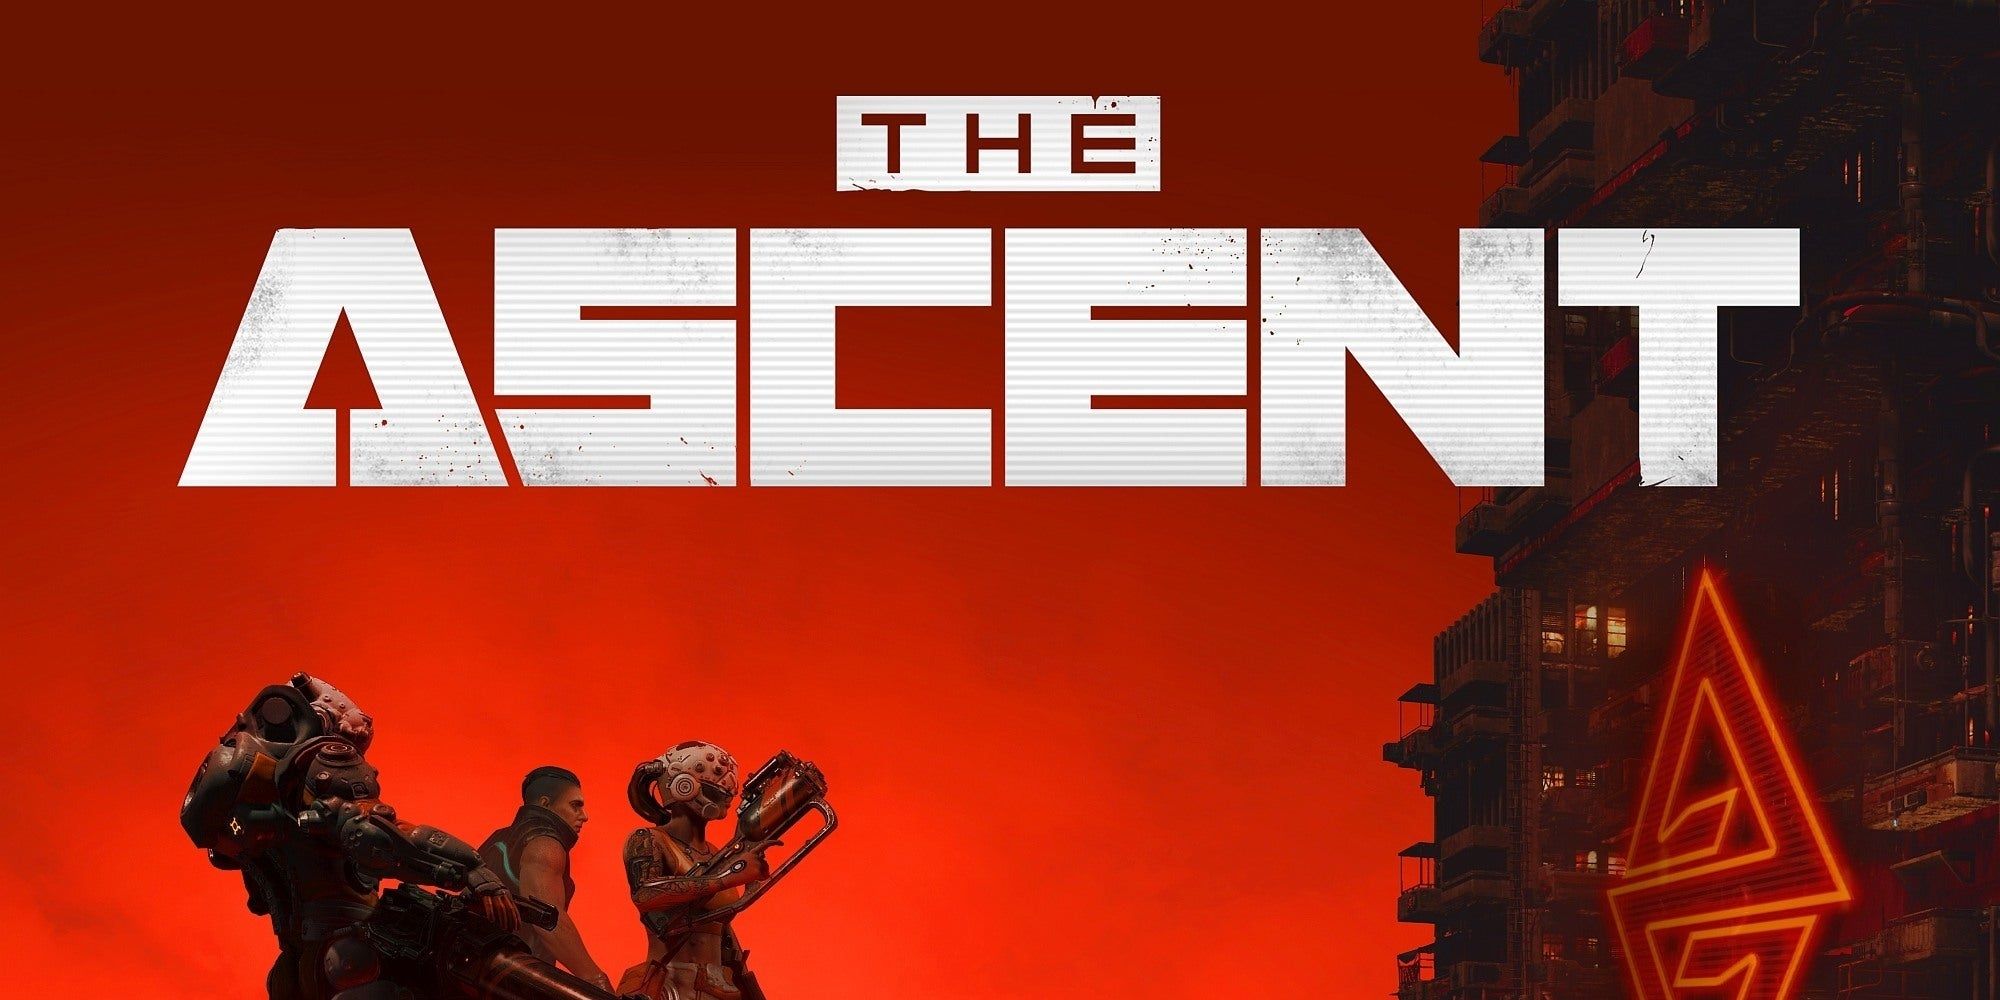 The official logo and title screen for The Ascent